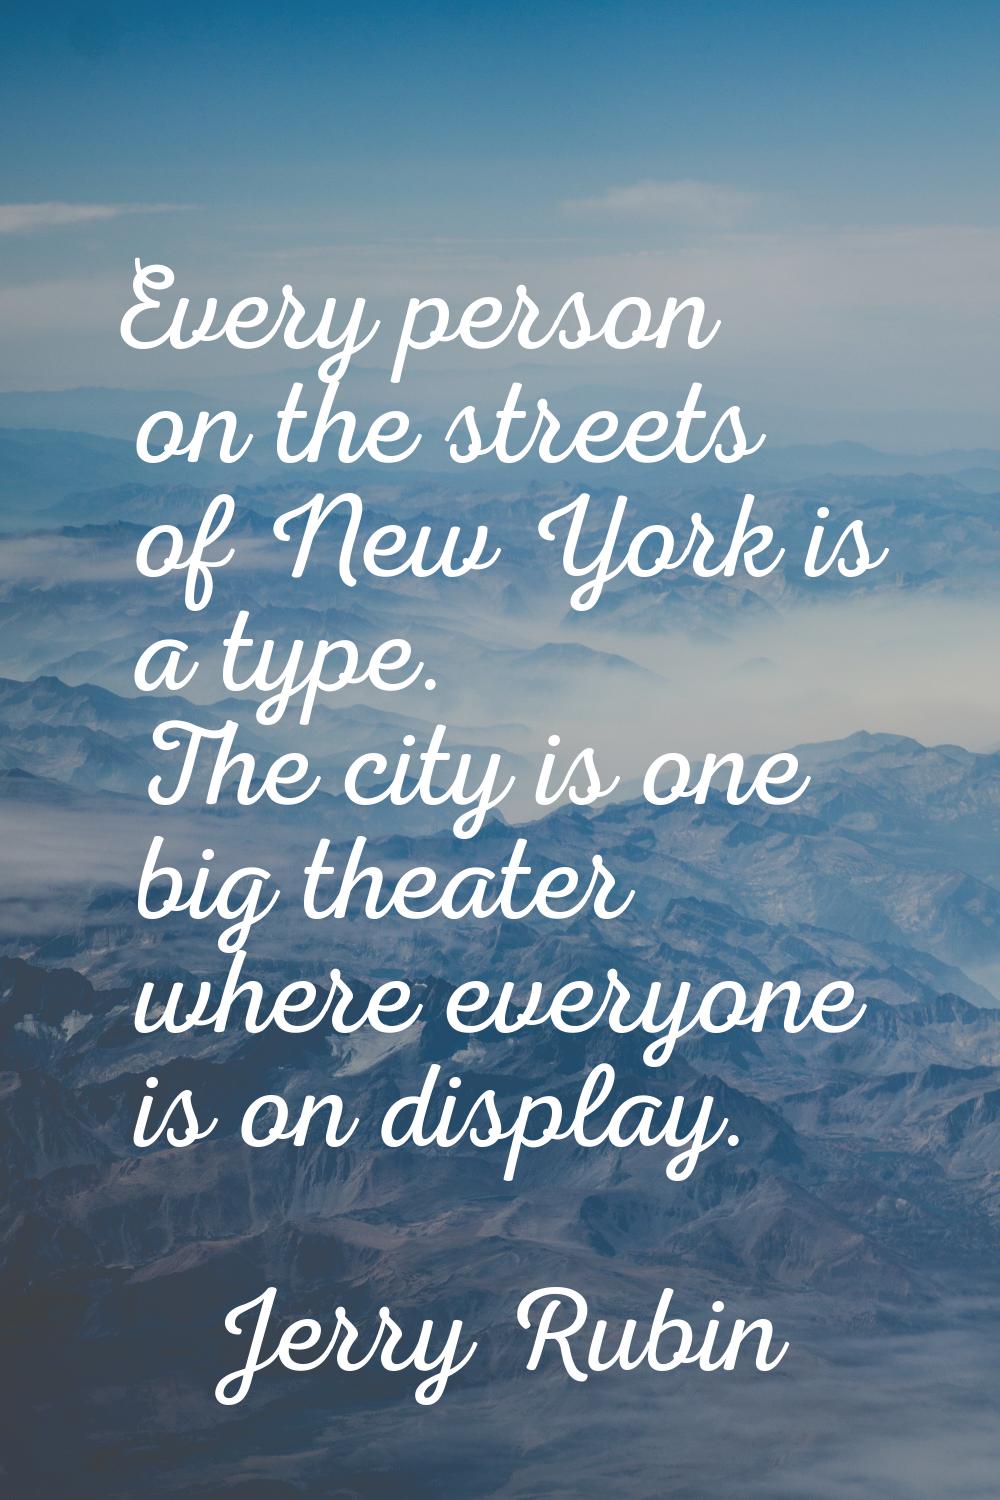 Every person on the streets of New York is a type. The city is one big theater where everyone is on